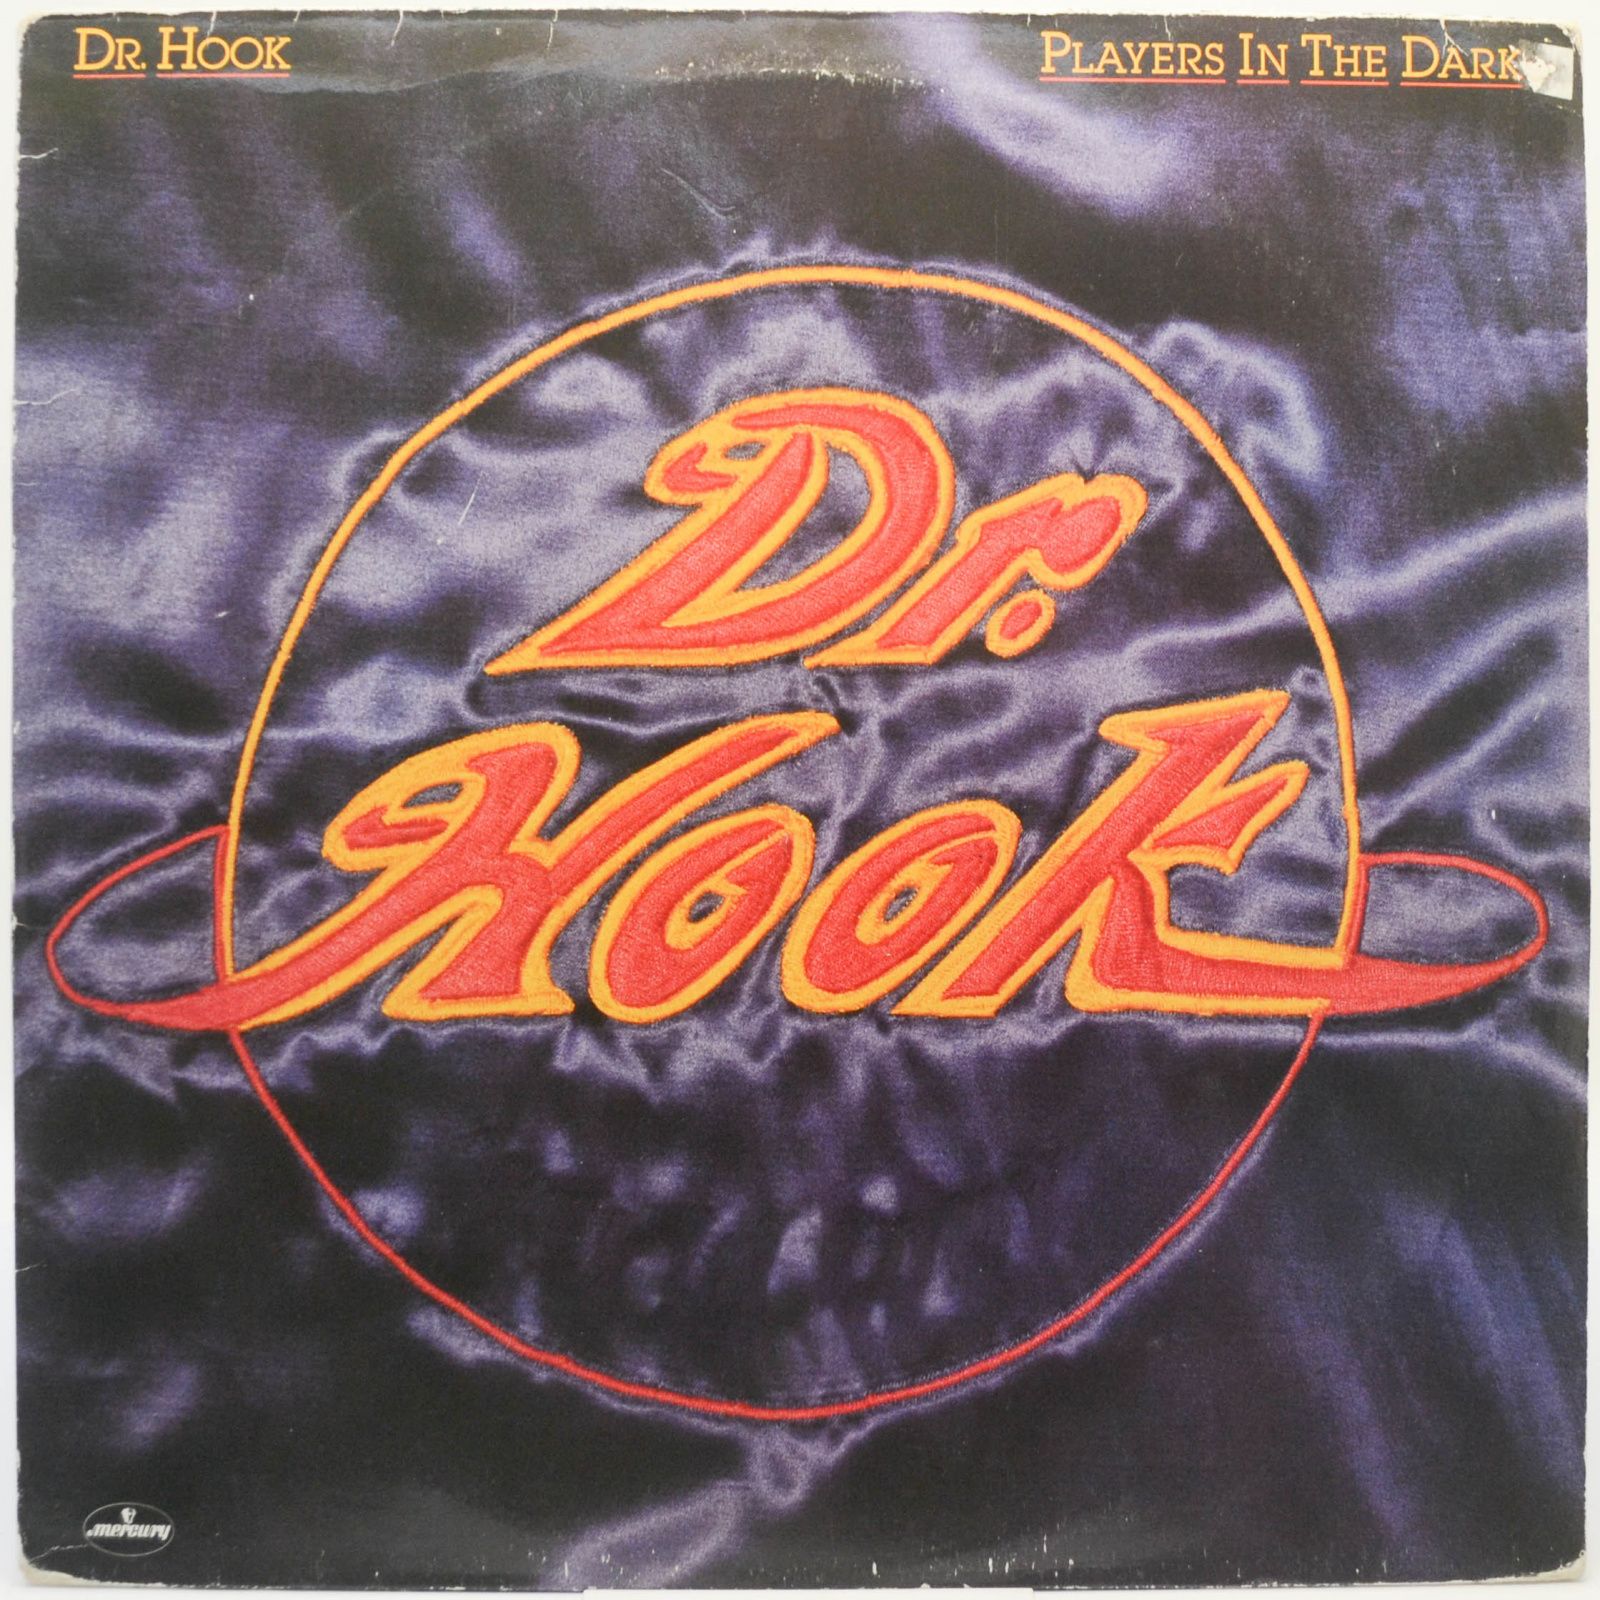 Dr. Hook — Players In The Dark, 1982